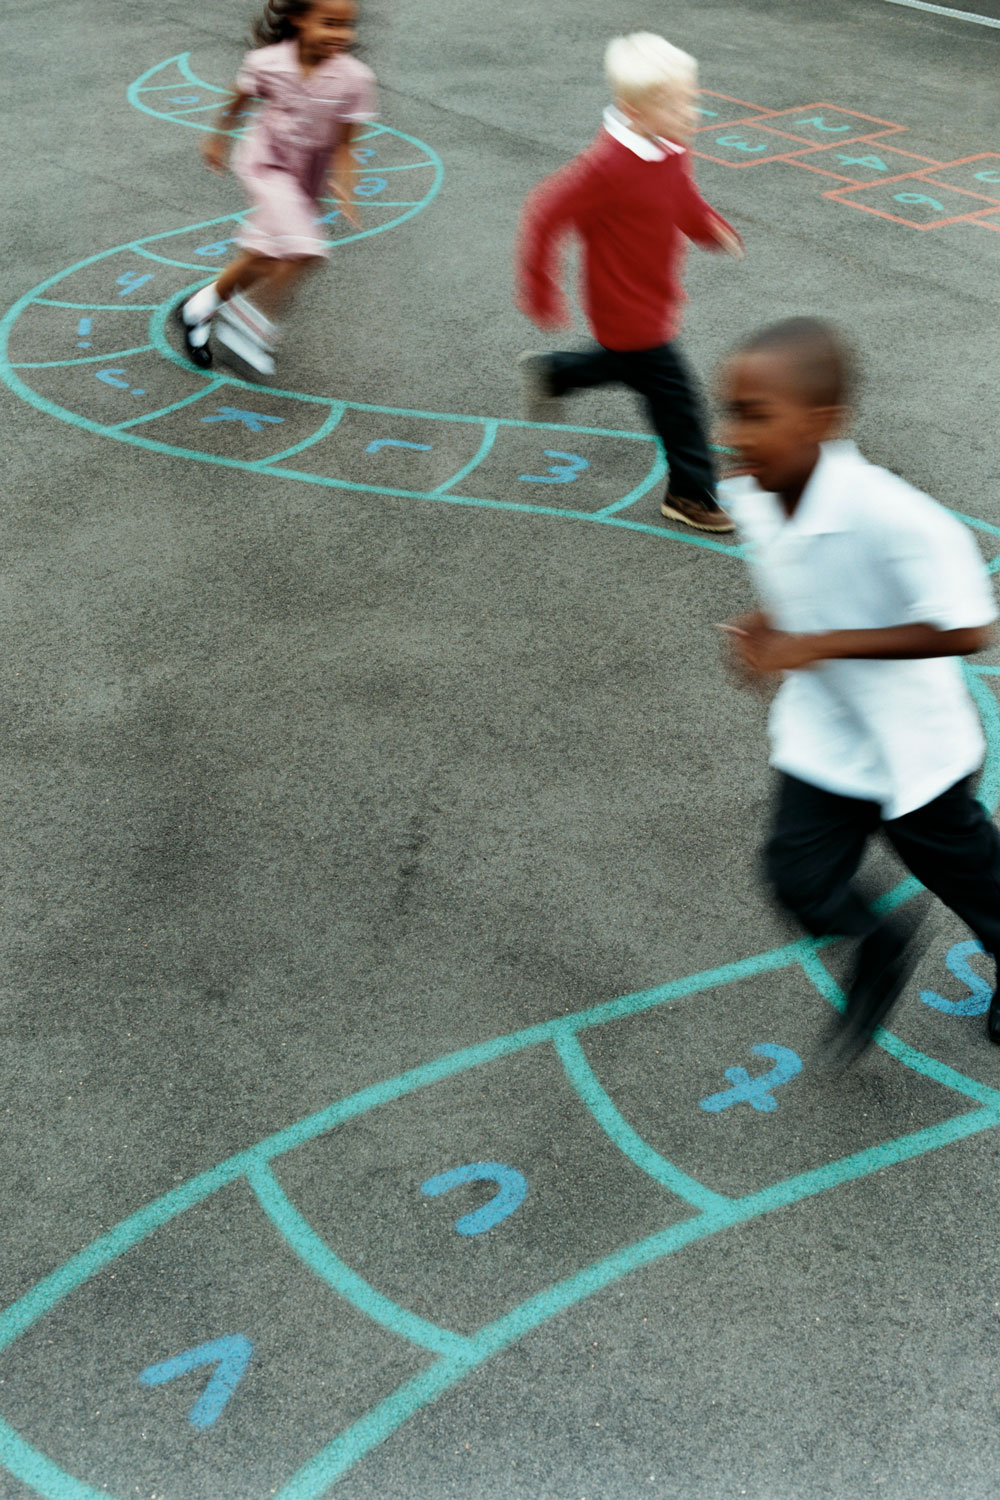 photo - Primary School Children Chasing Each Other in a School Playground